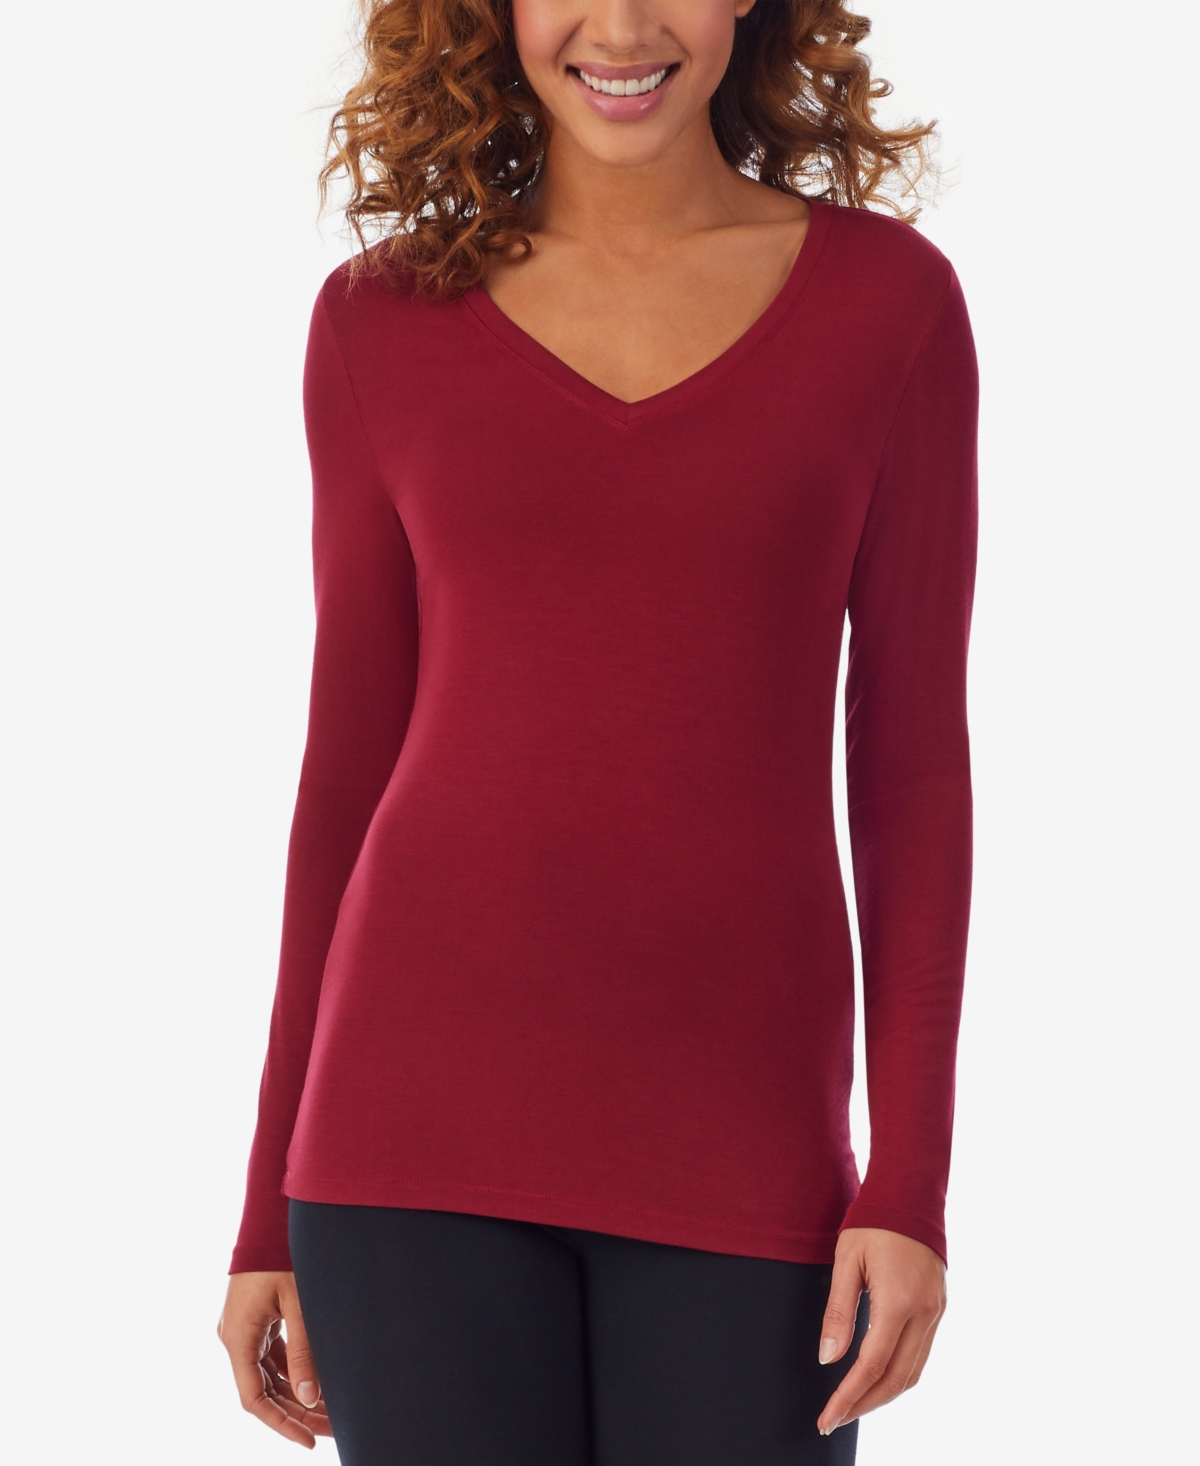 CUDDL DUDS WOMEN'S SOFTWEAR WITH STRETCH LONG SLEEVE V NECK TOP